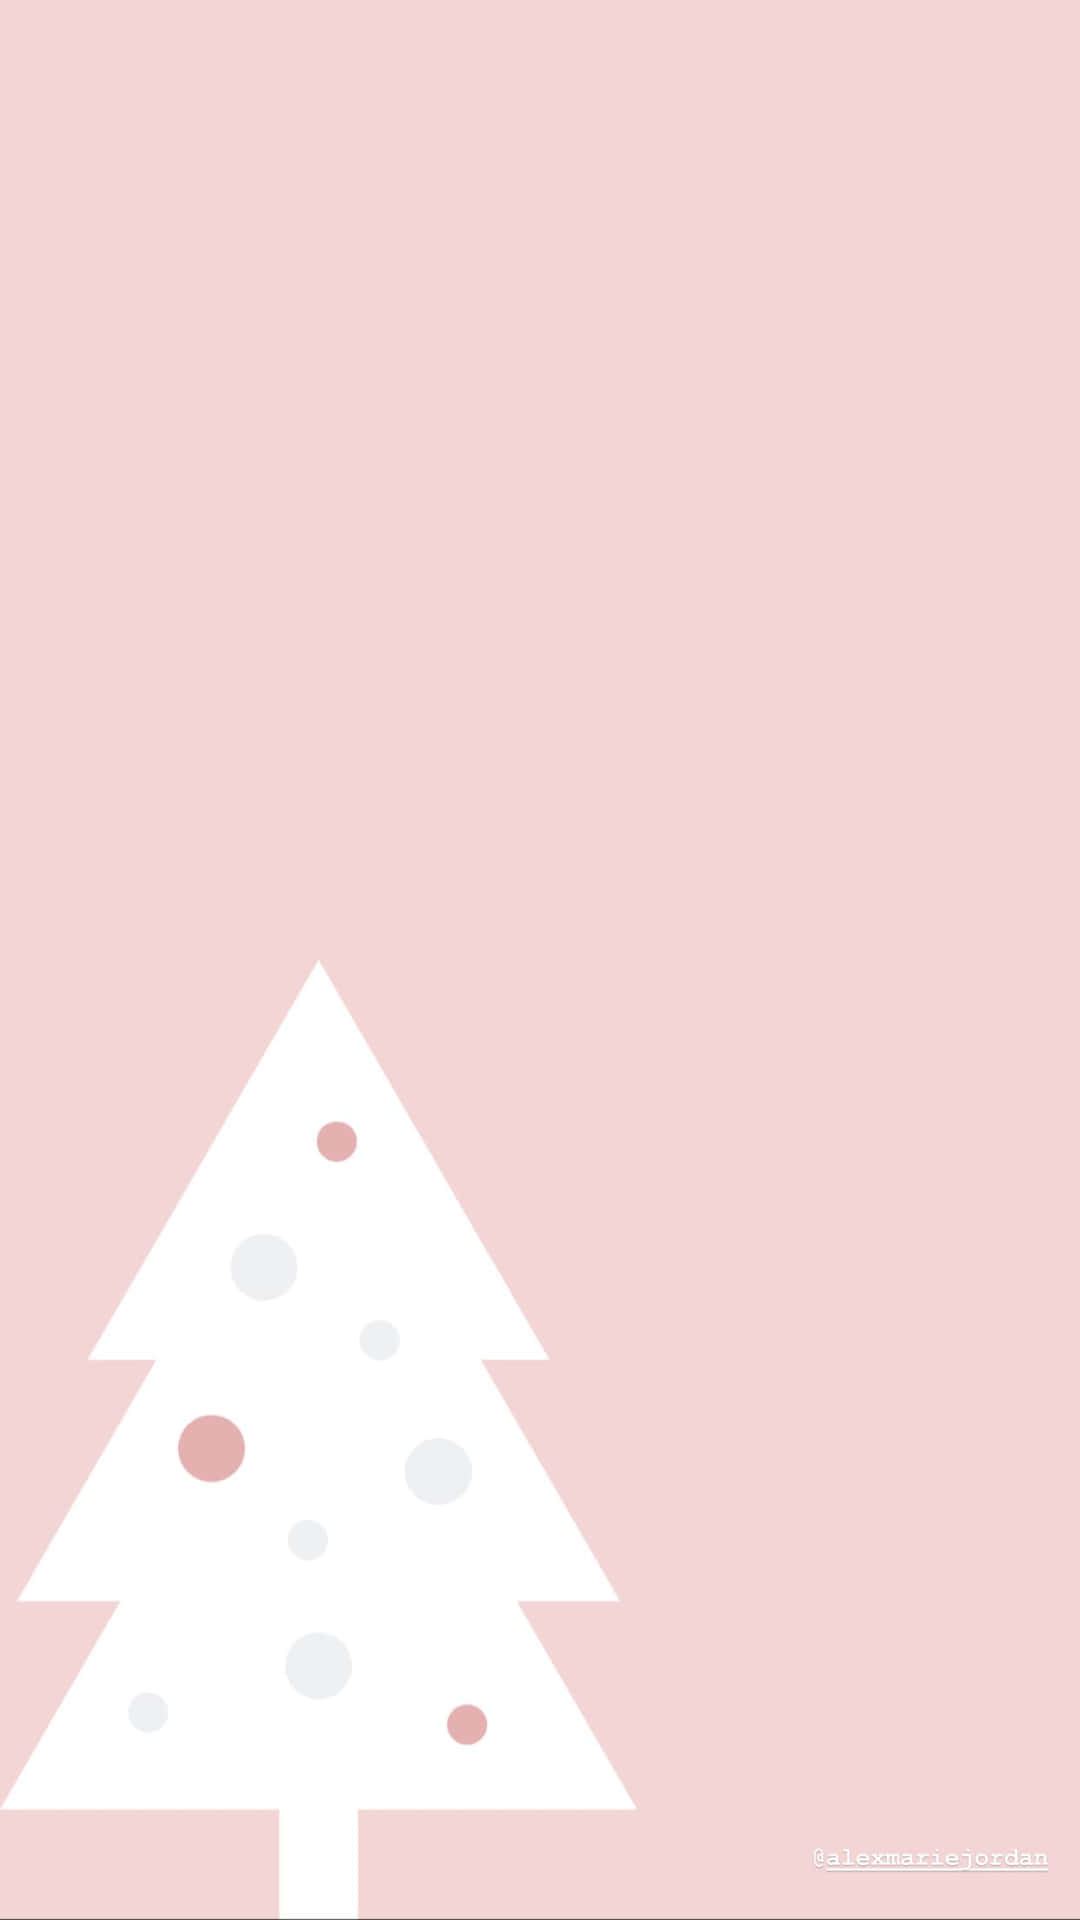 An original and festive pink Christmas tree for decorating your home this holiday season Wallpaper